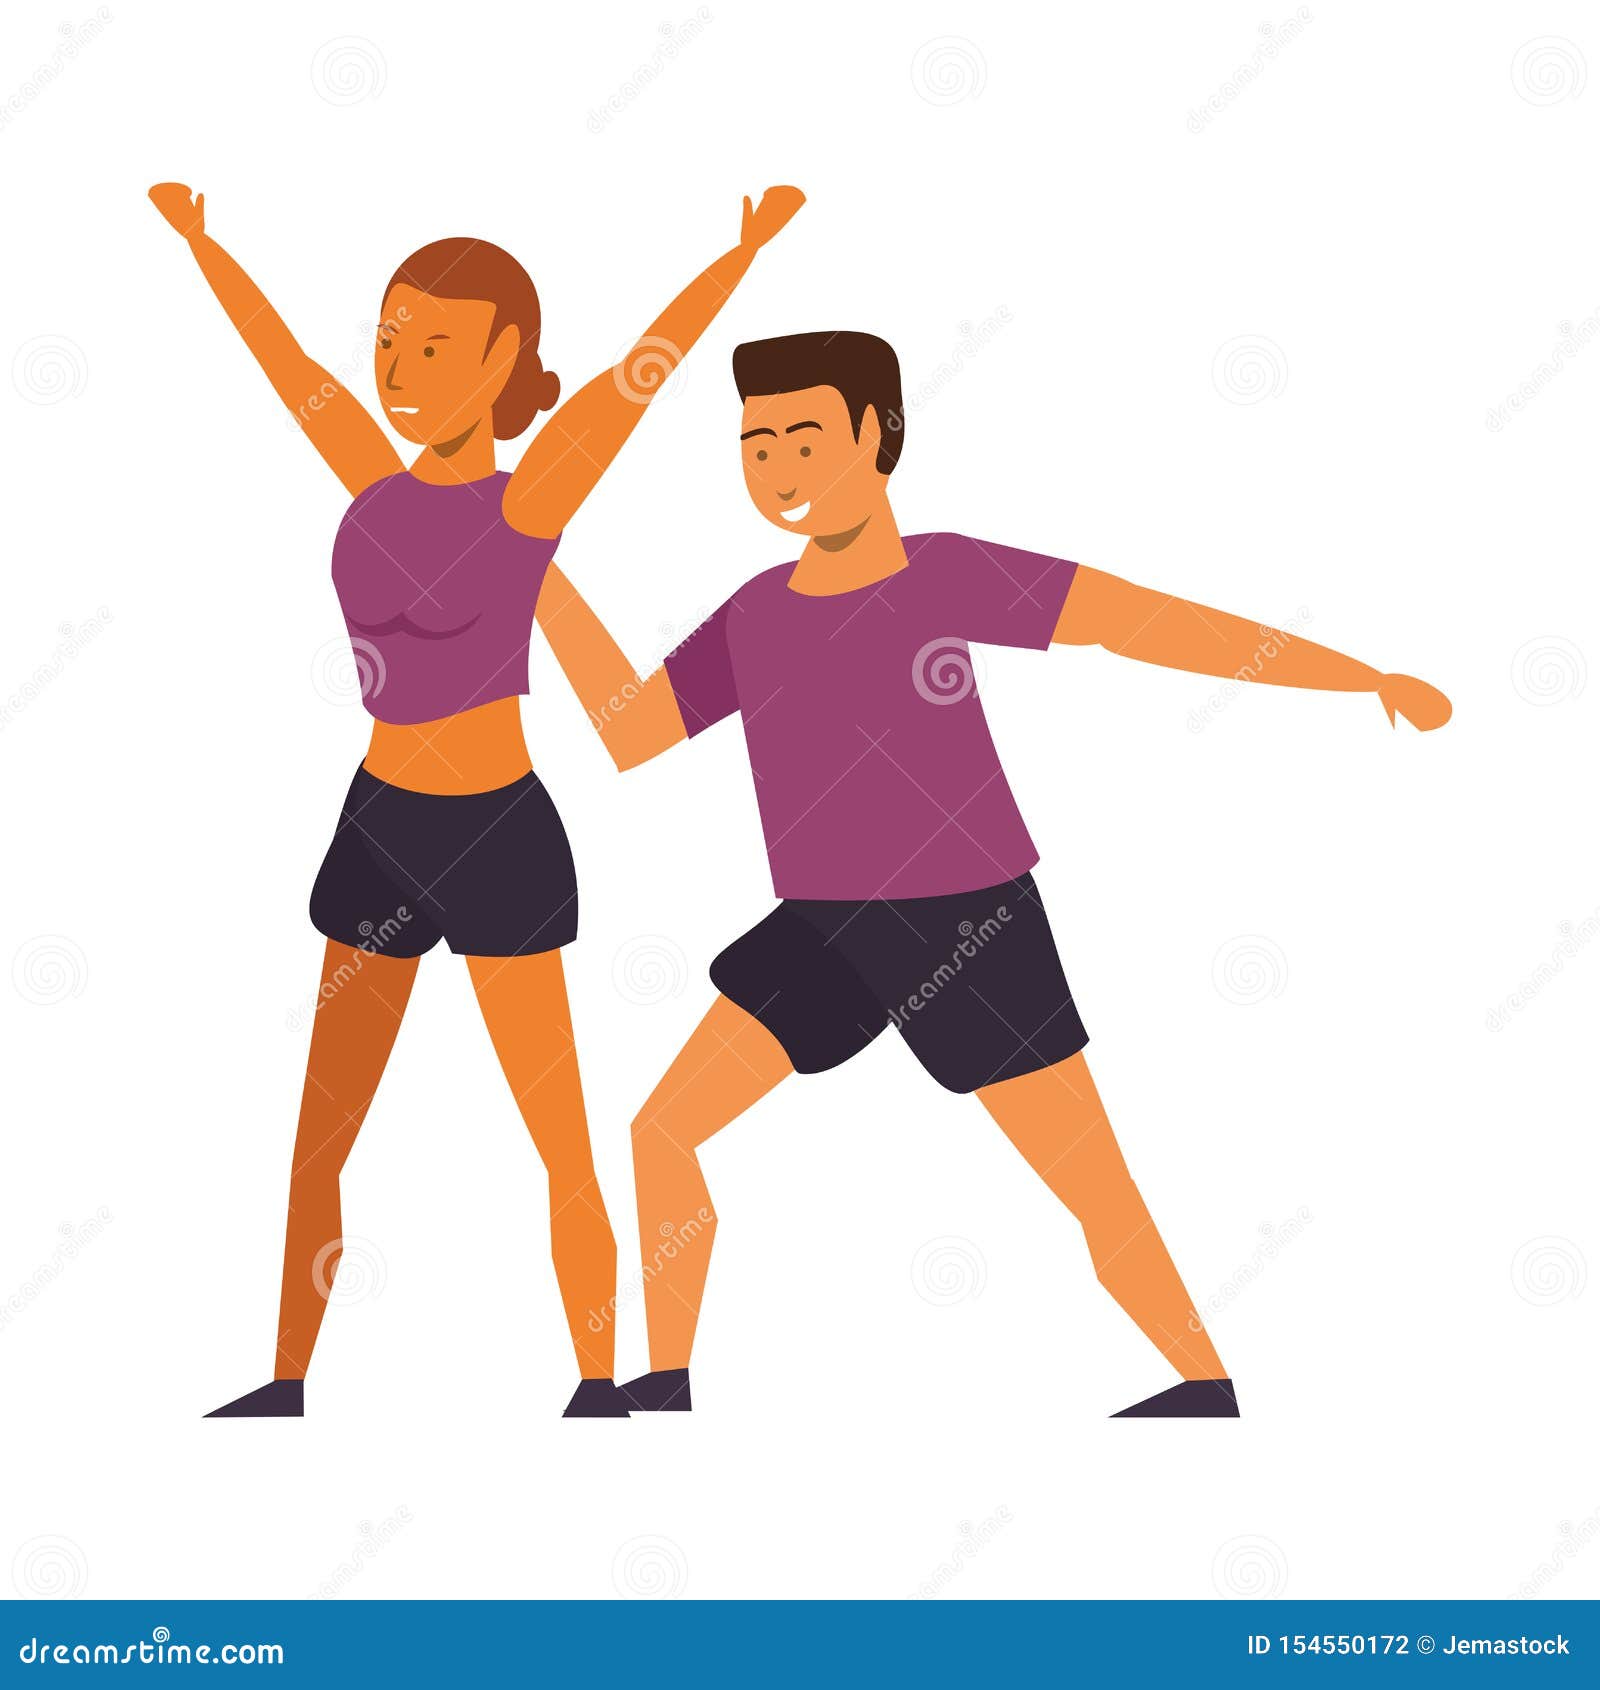 Fitness Sport Exercise Lifestyle Cartoon Stock Vector - Illustration of ...